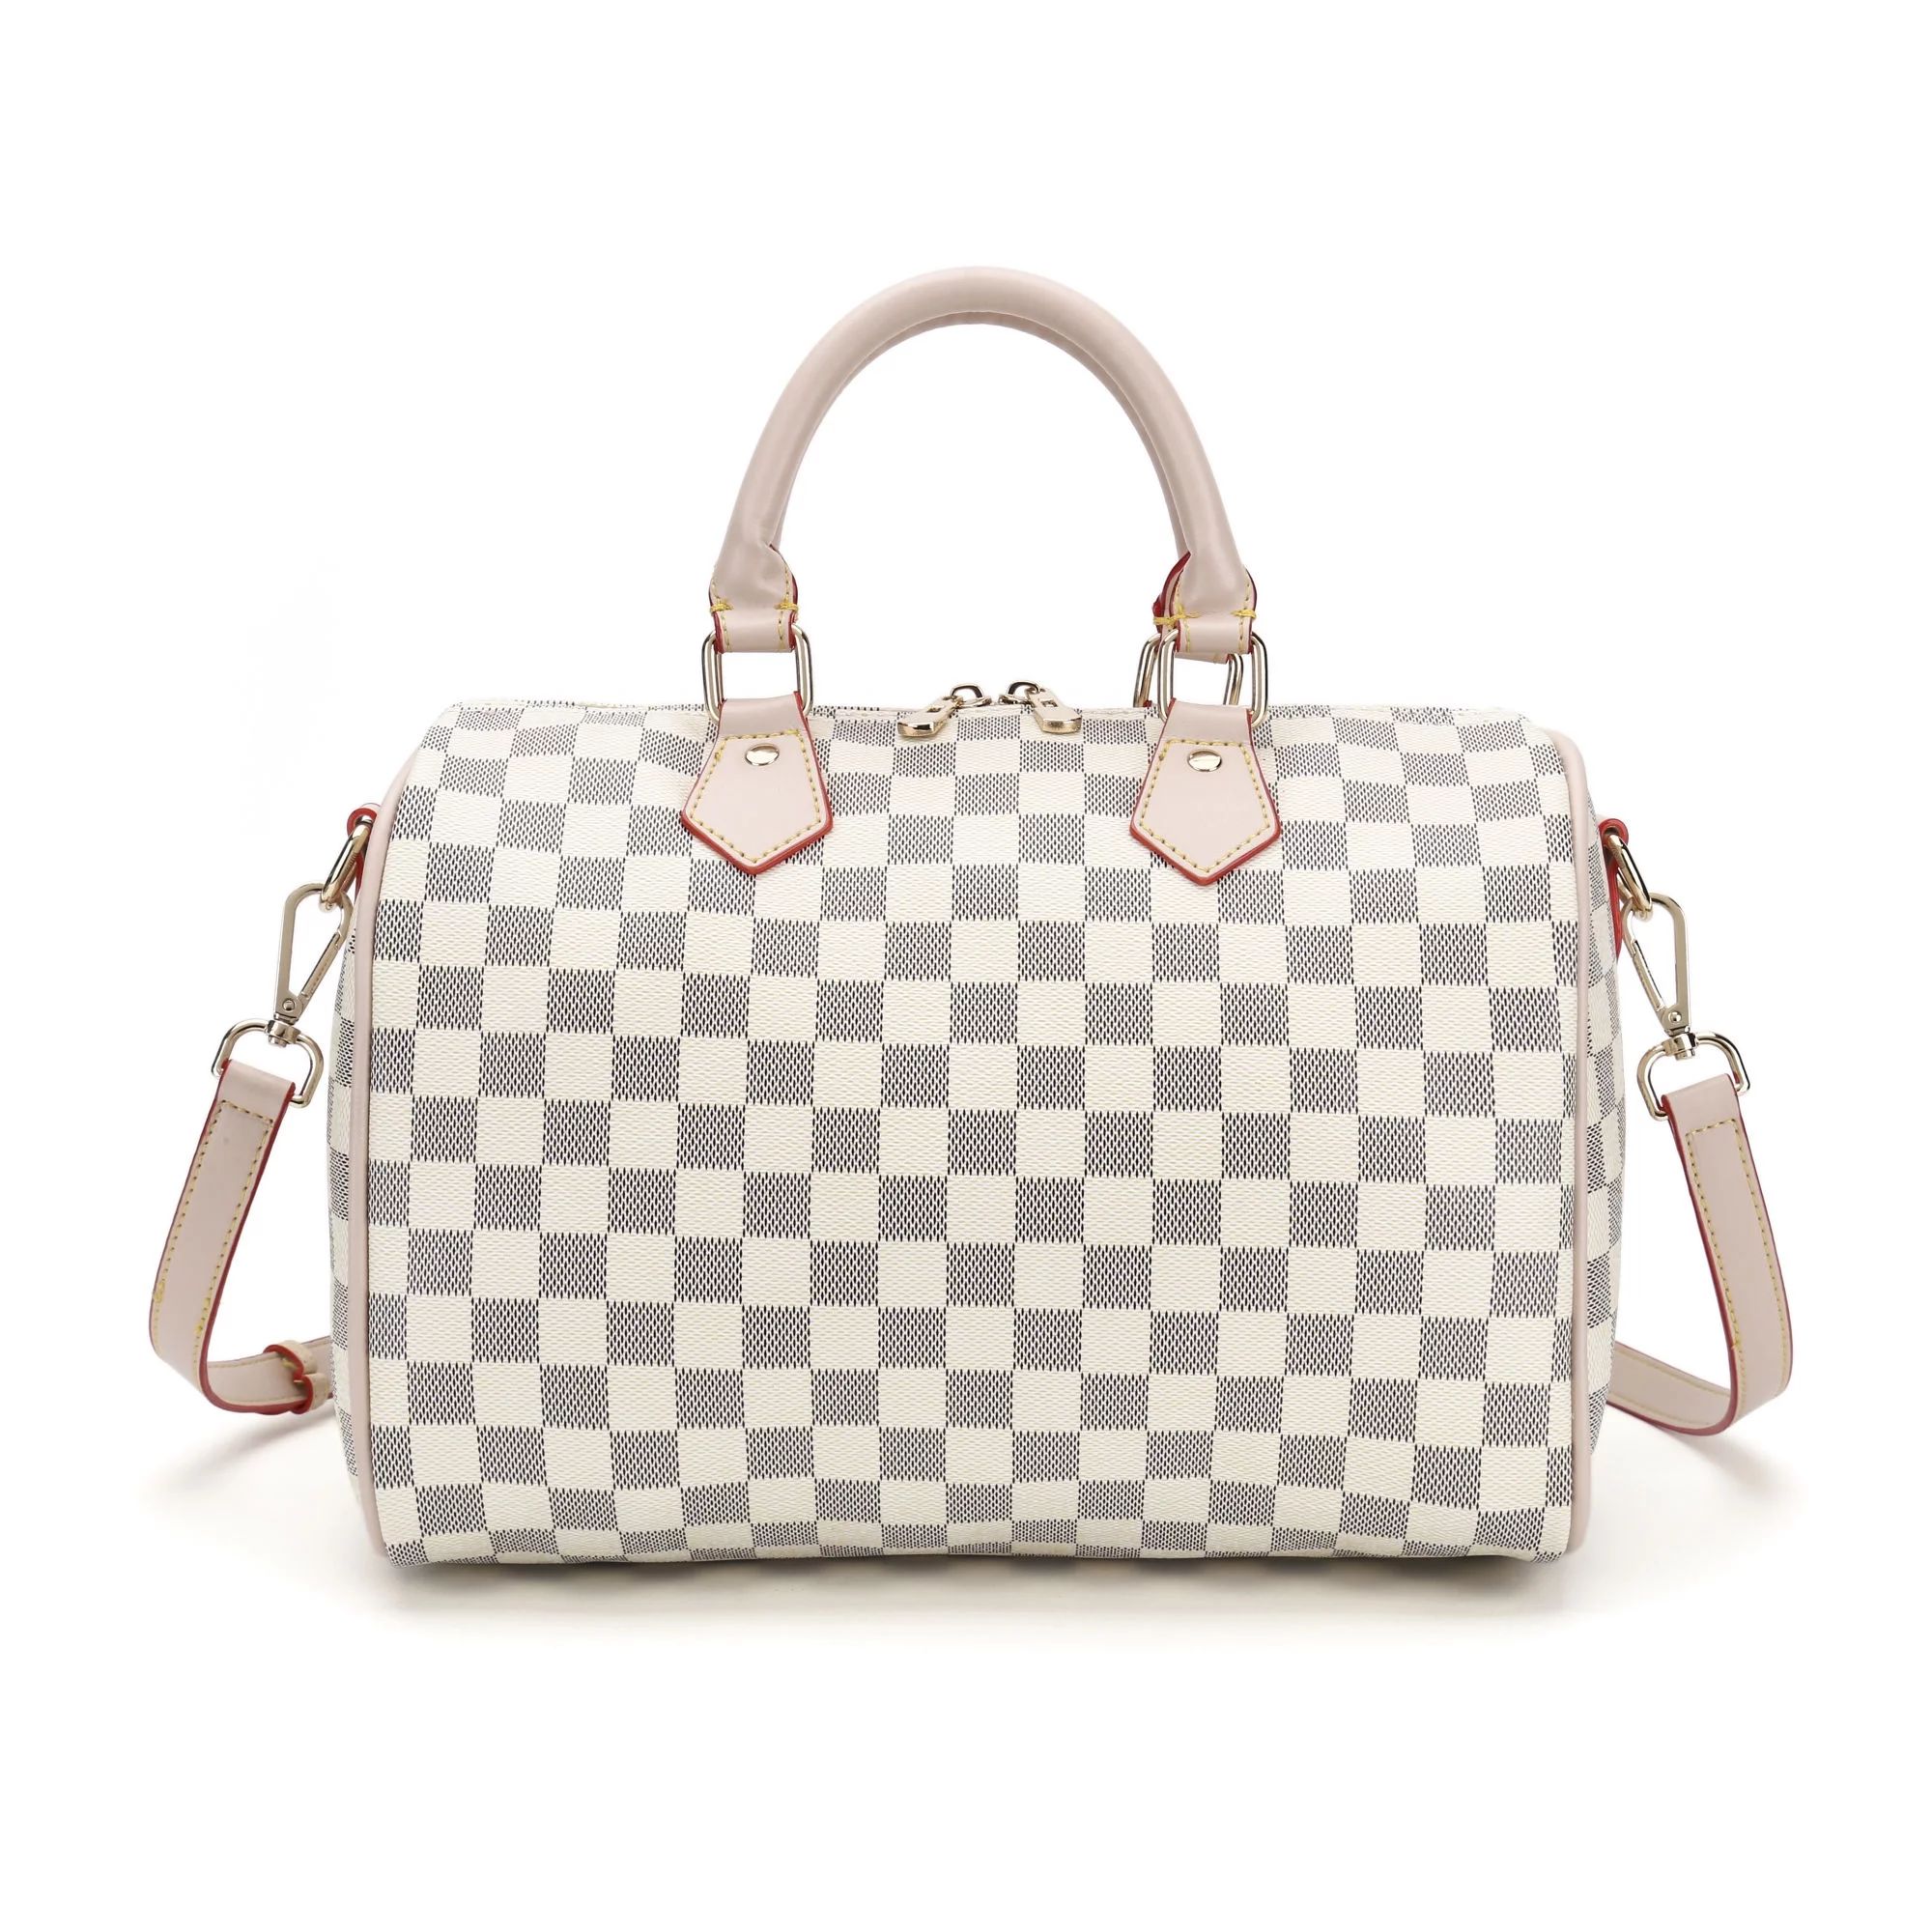 Richports Women's Checkered PU Leather Tote Bag